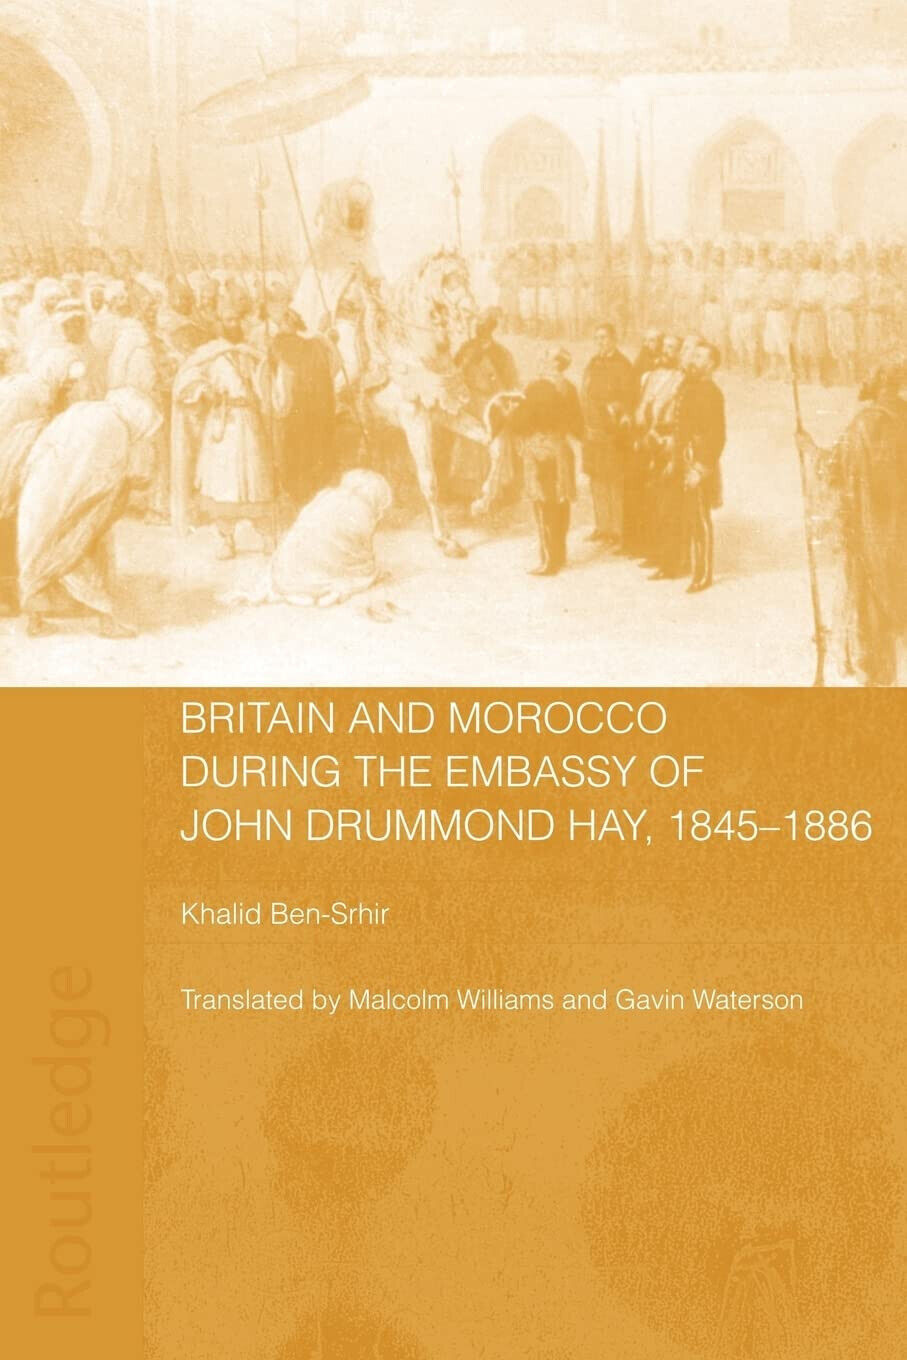 Britain and Morocco During the Embassy of John Drummond Hay - Ben-Srhir - 2020